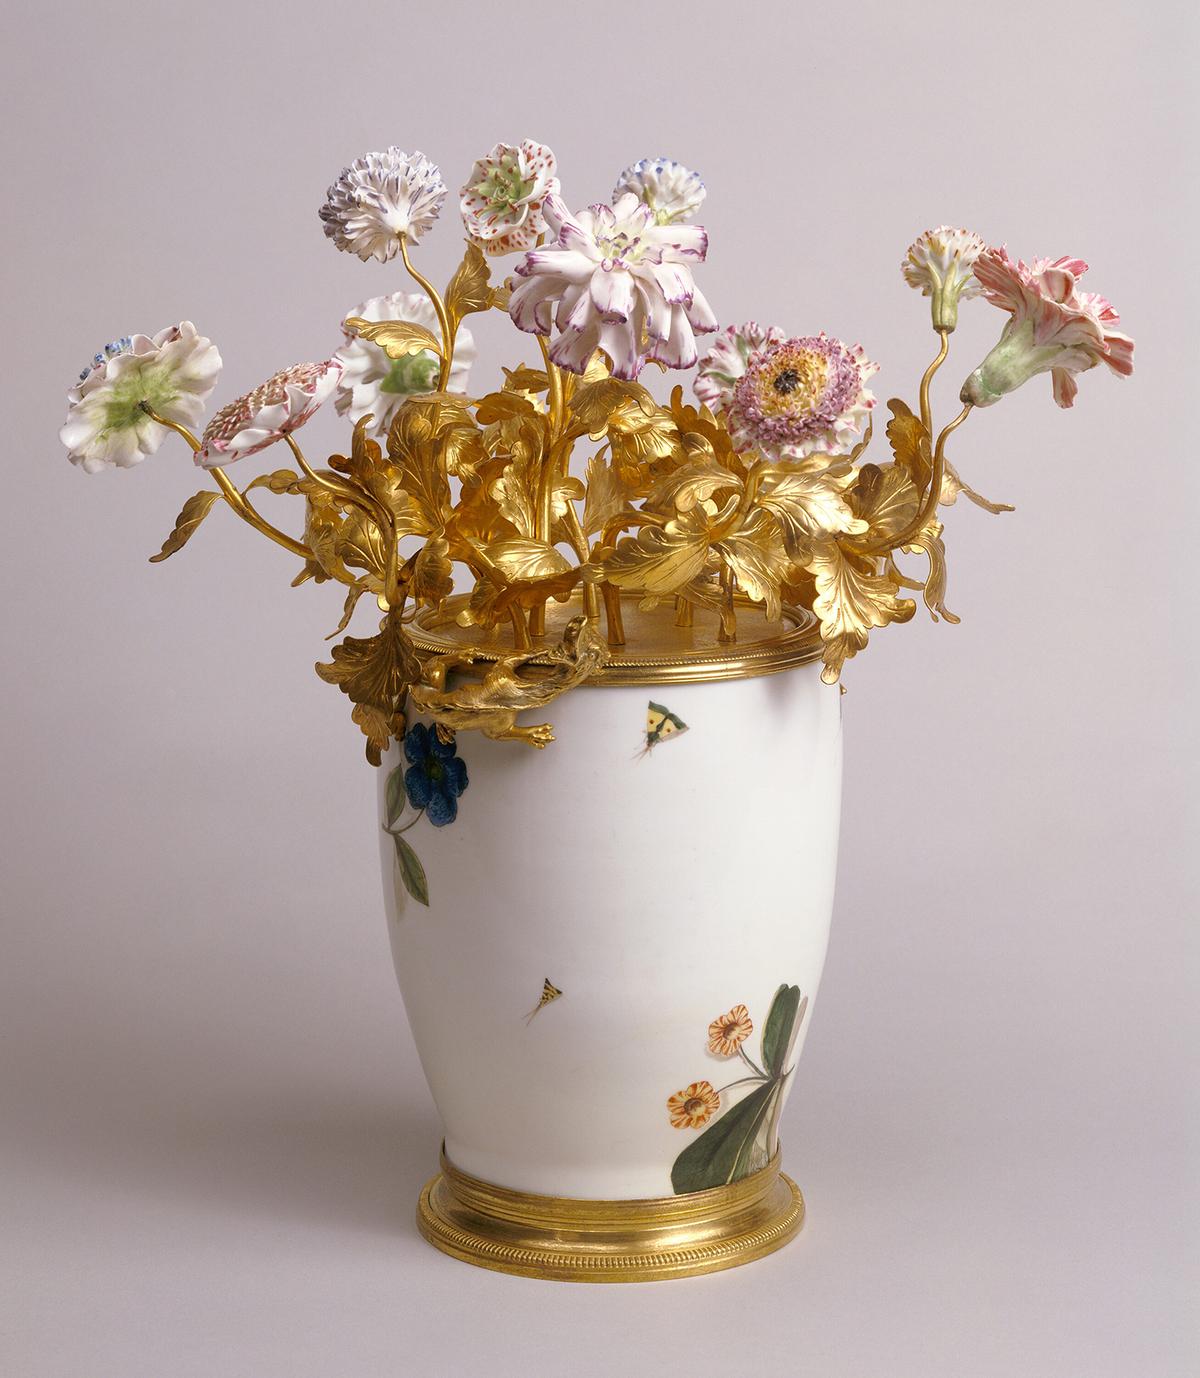 A mounted vase with flowers, vase before 1733, flowers from 1745–1750, and mount around 1745–1749, by the Meissen Porcelain Manufactory (vase), and the Vincennes Porcelain Manufactory (flowers). Hard-paste porcelain and polychrome-enamel decoration; soft-paste porcelain; gilt-bronze. Getty Center, Los Angeles. (Public Domain)